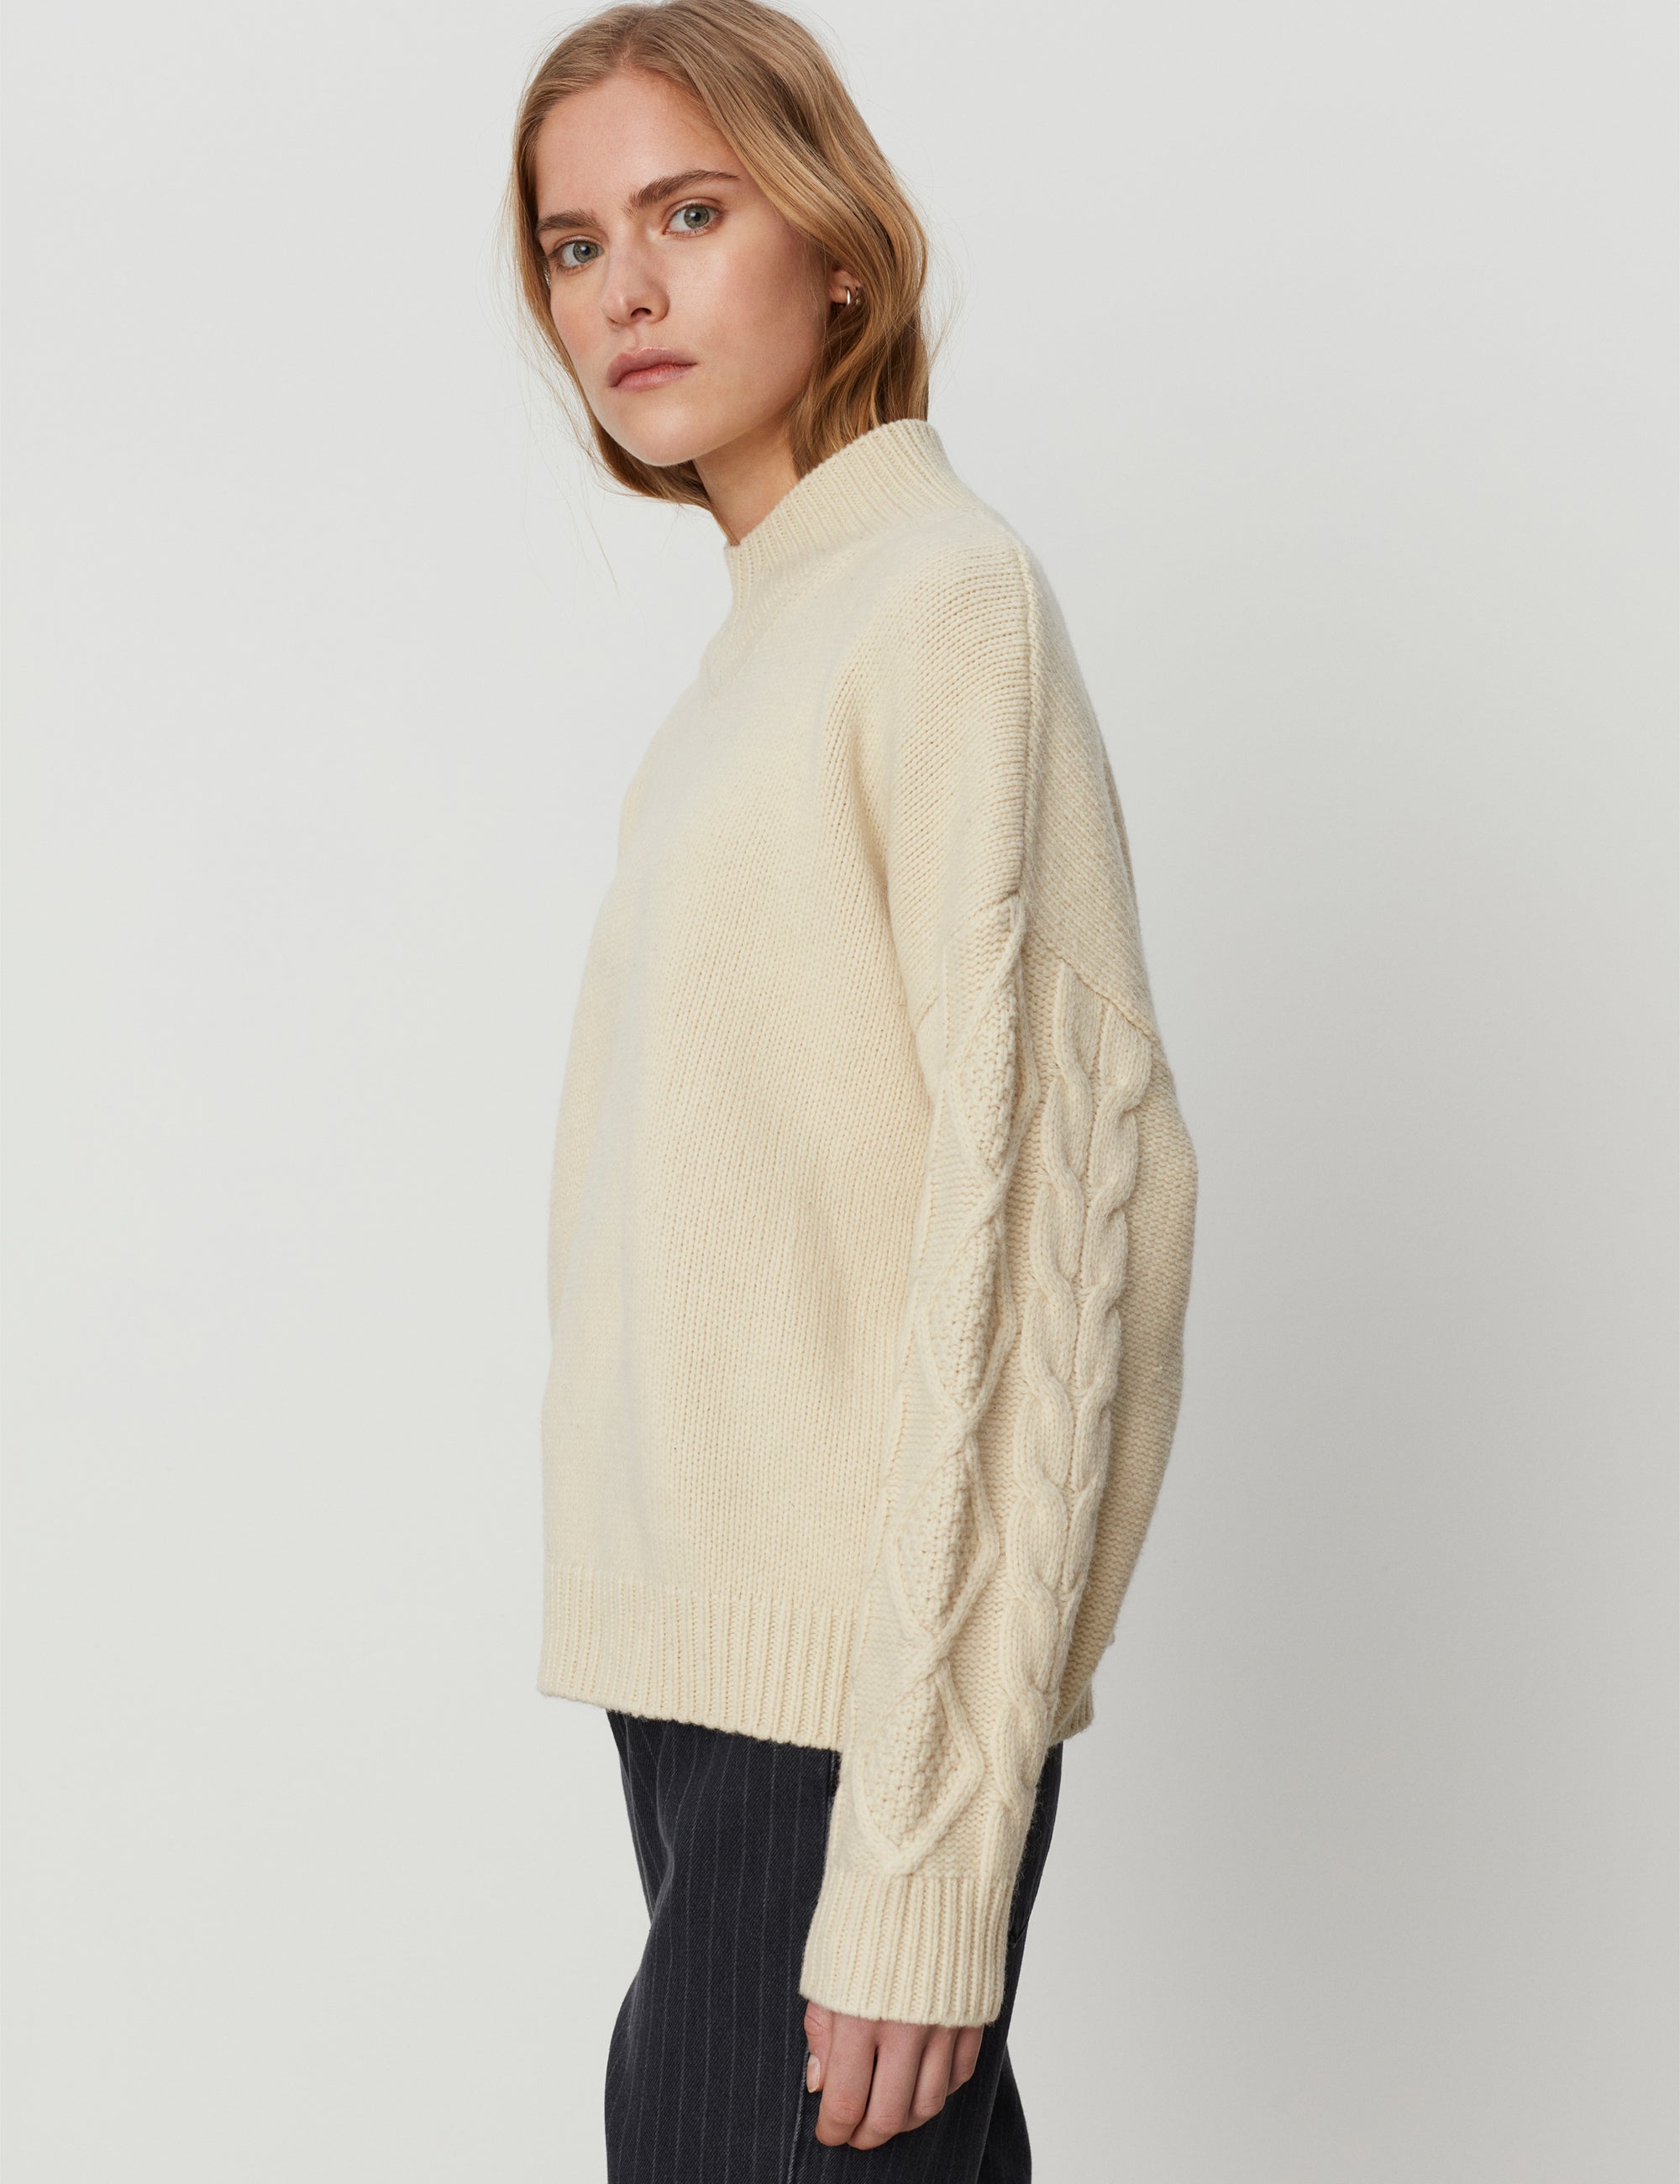 Linden Sweater - Babs The Label